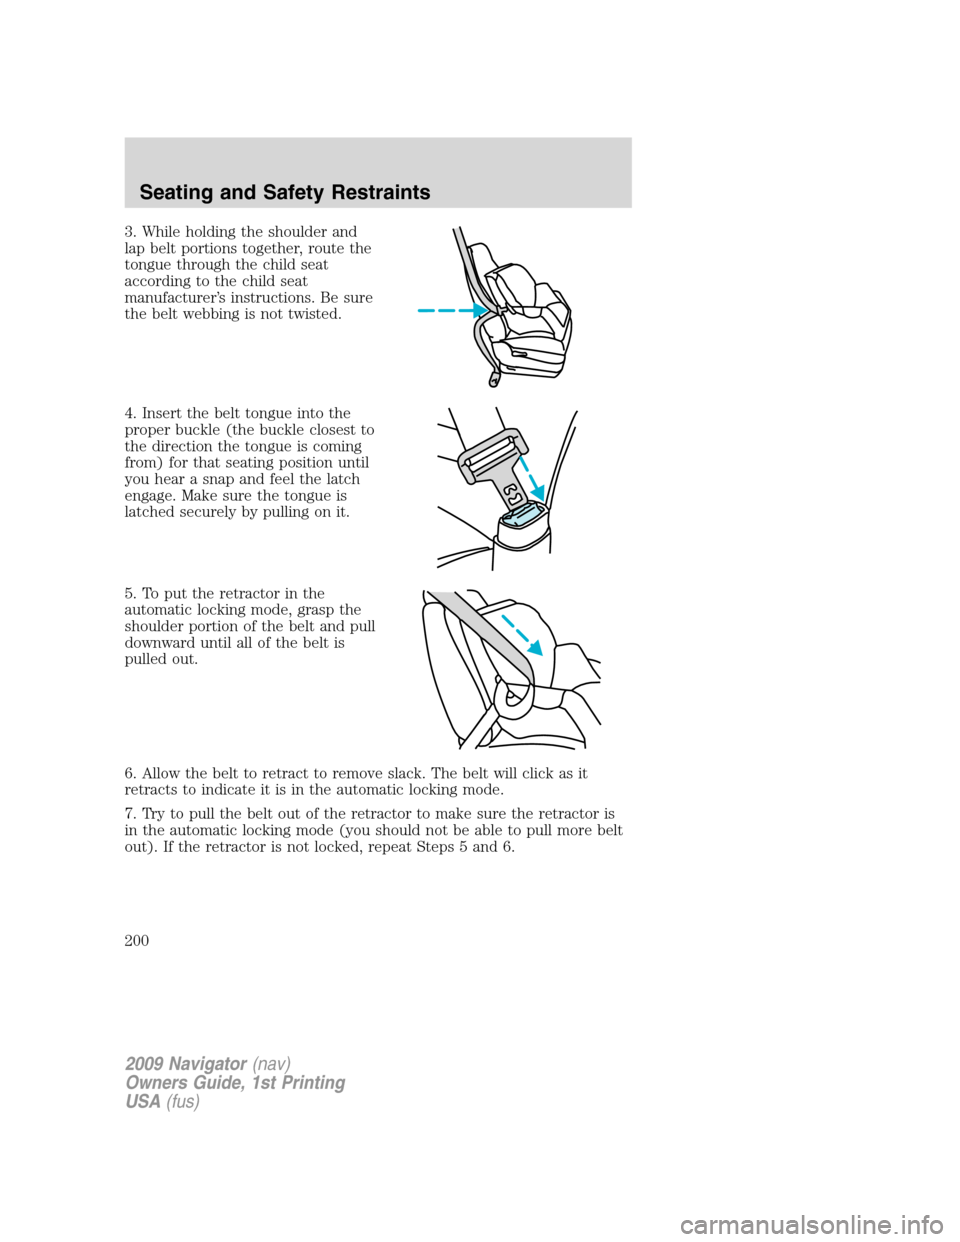 LINCOLN NAVIGATOR 2009 Service Manual 3. While holding the shoulder and
lap belt portions together, route the
tongue through the child seat
according to the child seat
manufacturer’s instructions. Be sure
the belt webbing is not twisted